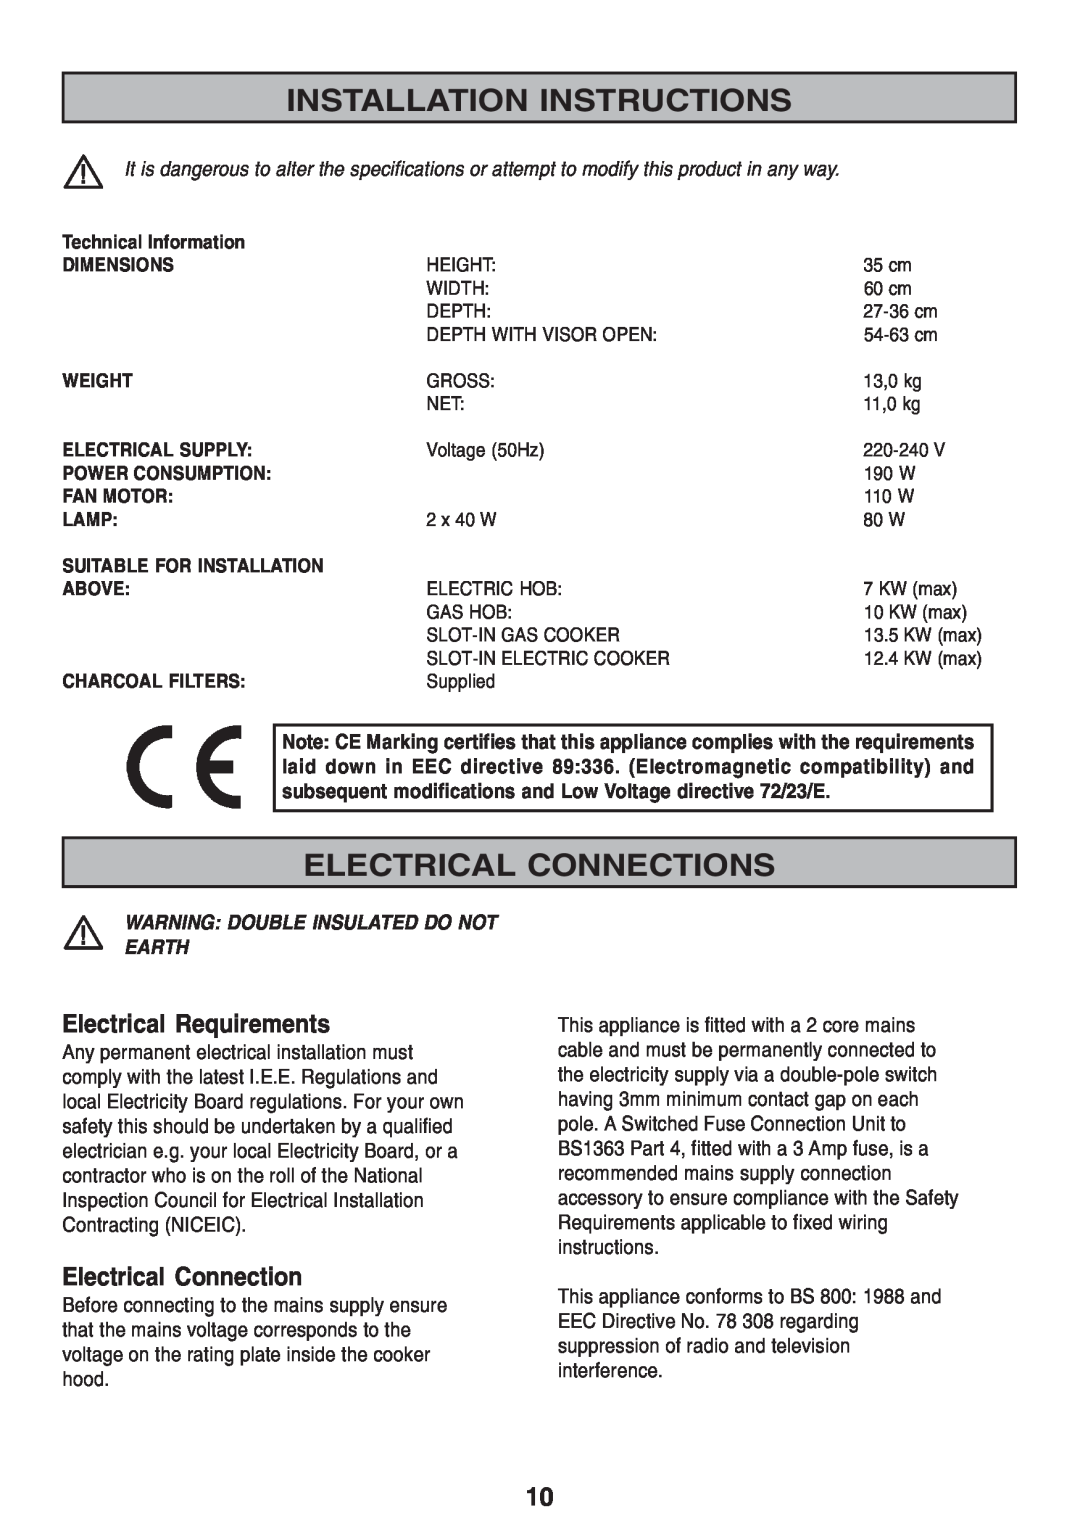 Zanussi ZHI 600 manual Installation Instructions, Electrical Connections, Electrical Requirements 